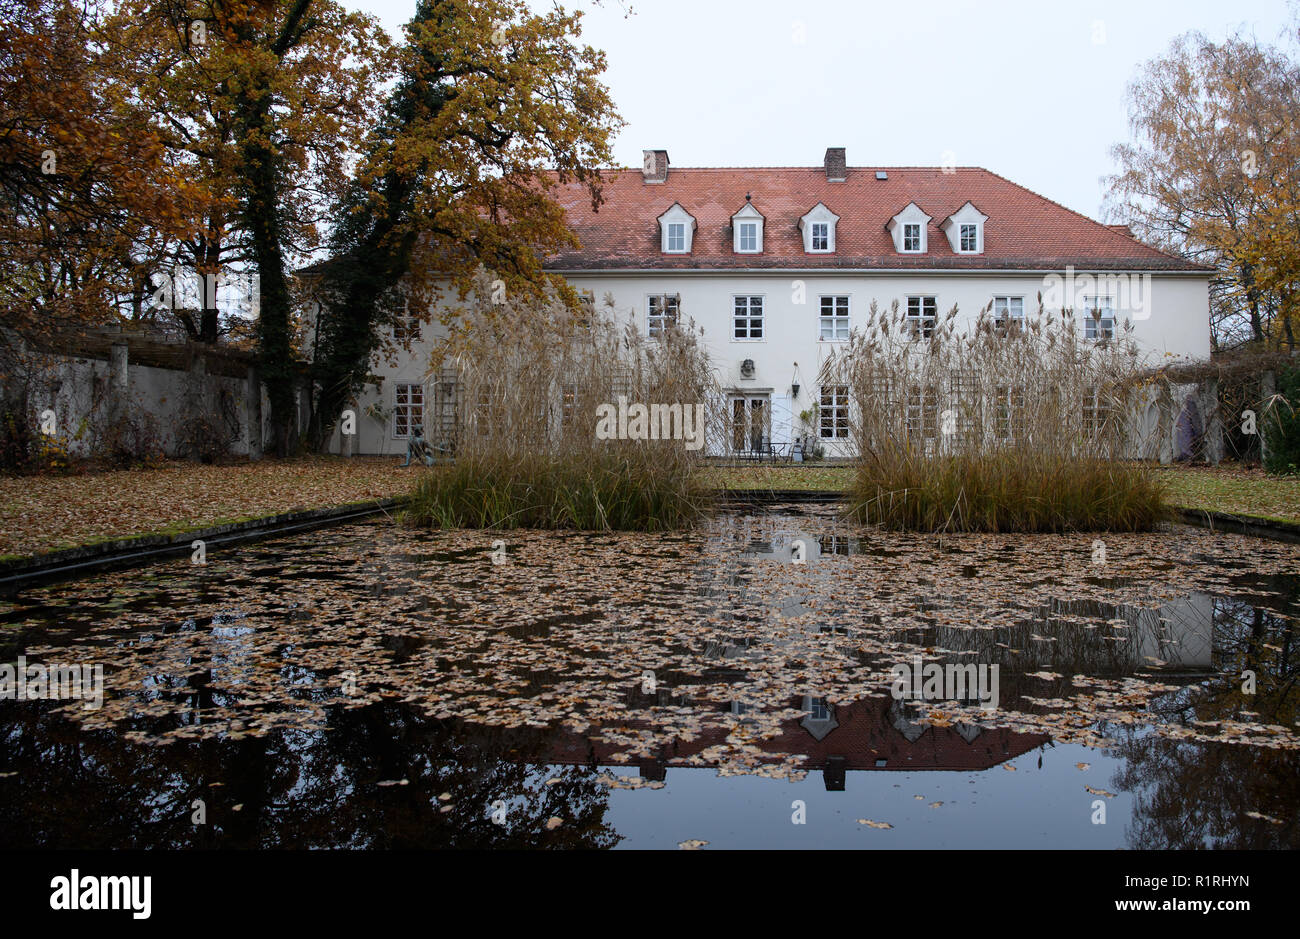 Pullach, Germany. 09th Nov, 2018. The president's villa on the premises of the Federal Intelligence Service (BND). The villa was once the residence of Martin Bormann, head of the party office of the NSDAP and a confidant of Hitler, and belonged to the former Reichssiedlung Rudolf Heß, which was built between 1936 and 1938. From 1947, the buildings were used by the Gehlen organization and later by the Federal Intelligence Service (BND). Credit: Sven Hoppe/dpa/Alamy Live News Stock Photo